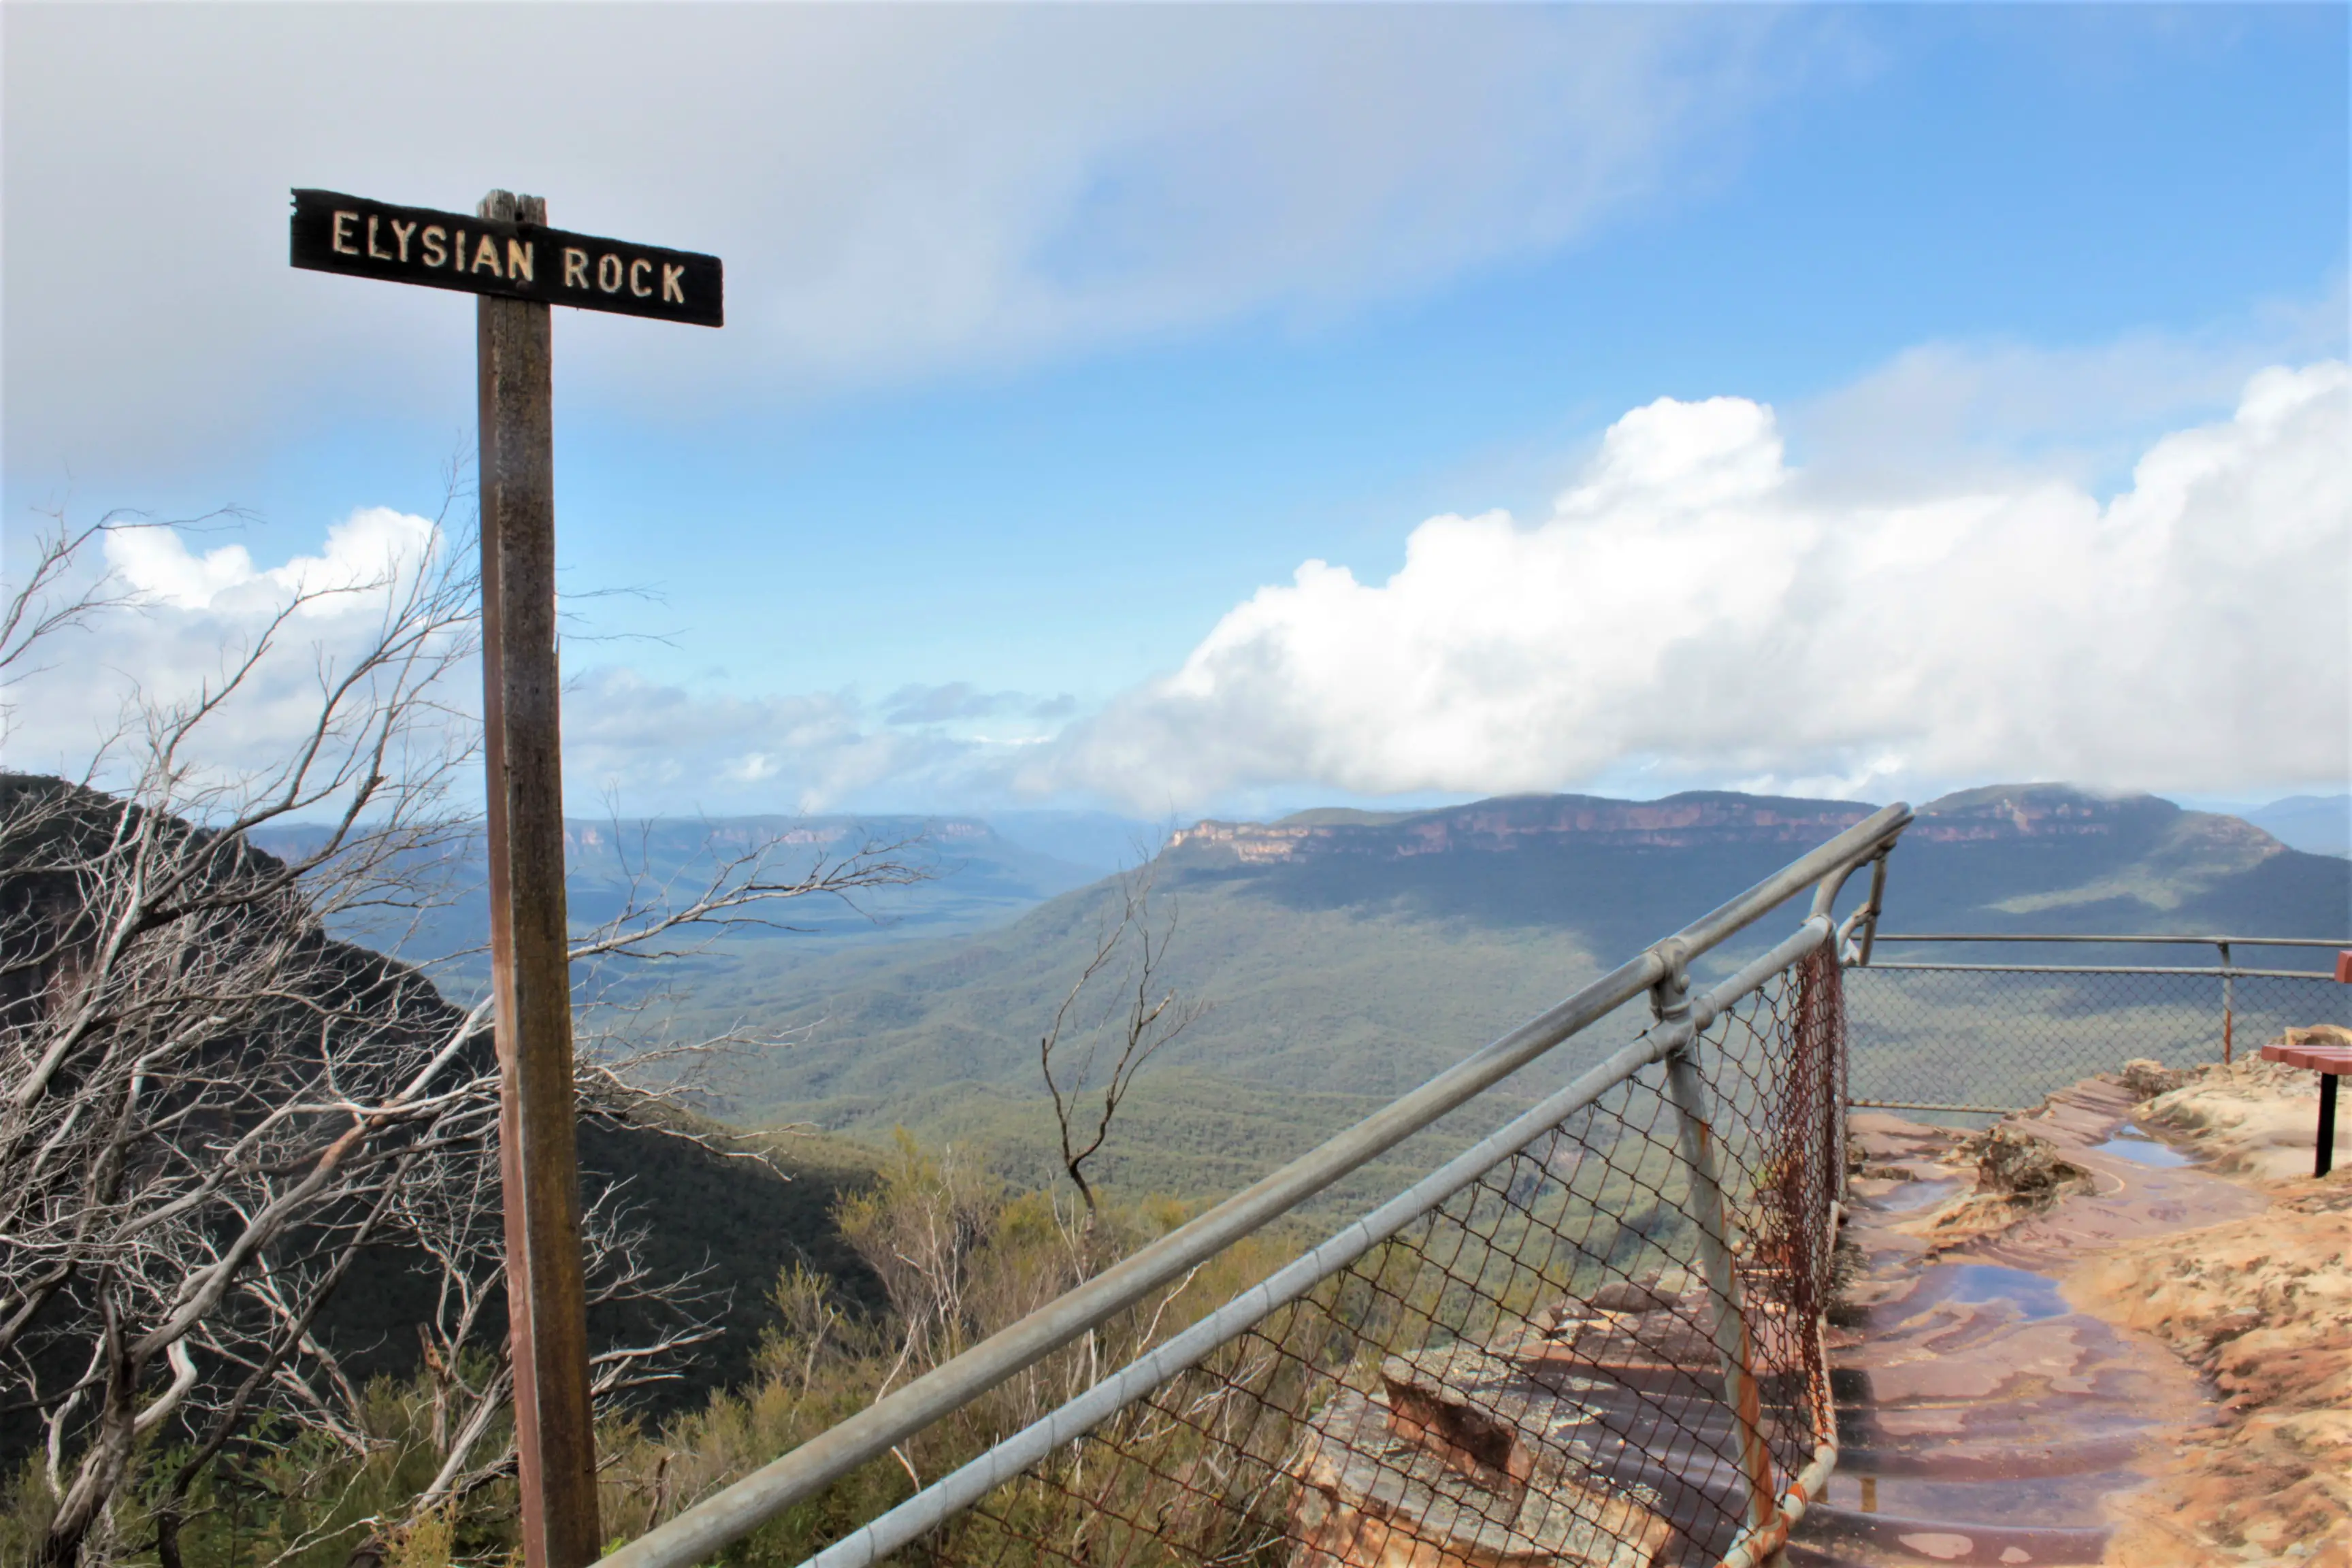 Find out why Australia makes the perfect walking holiday. An overview of hiking in Australia: from bush tracks in national parks to coastal tracks with stunning sea views.